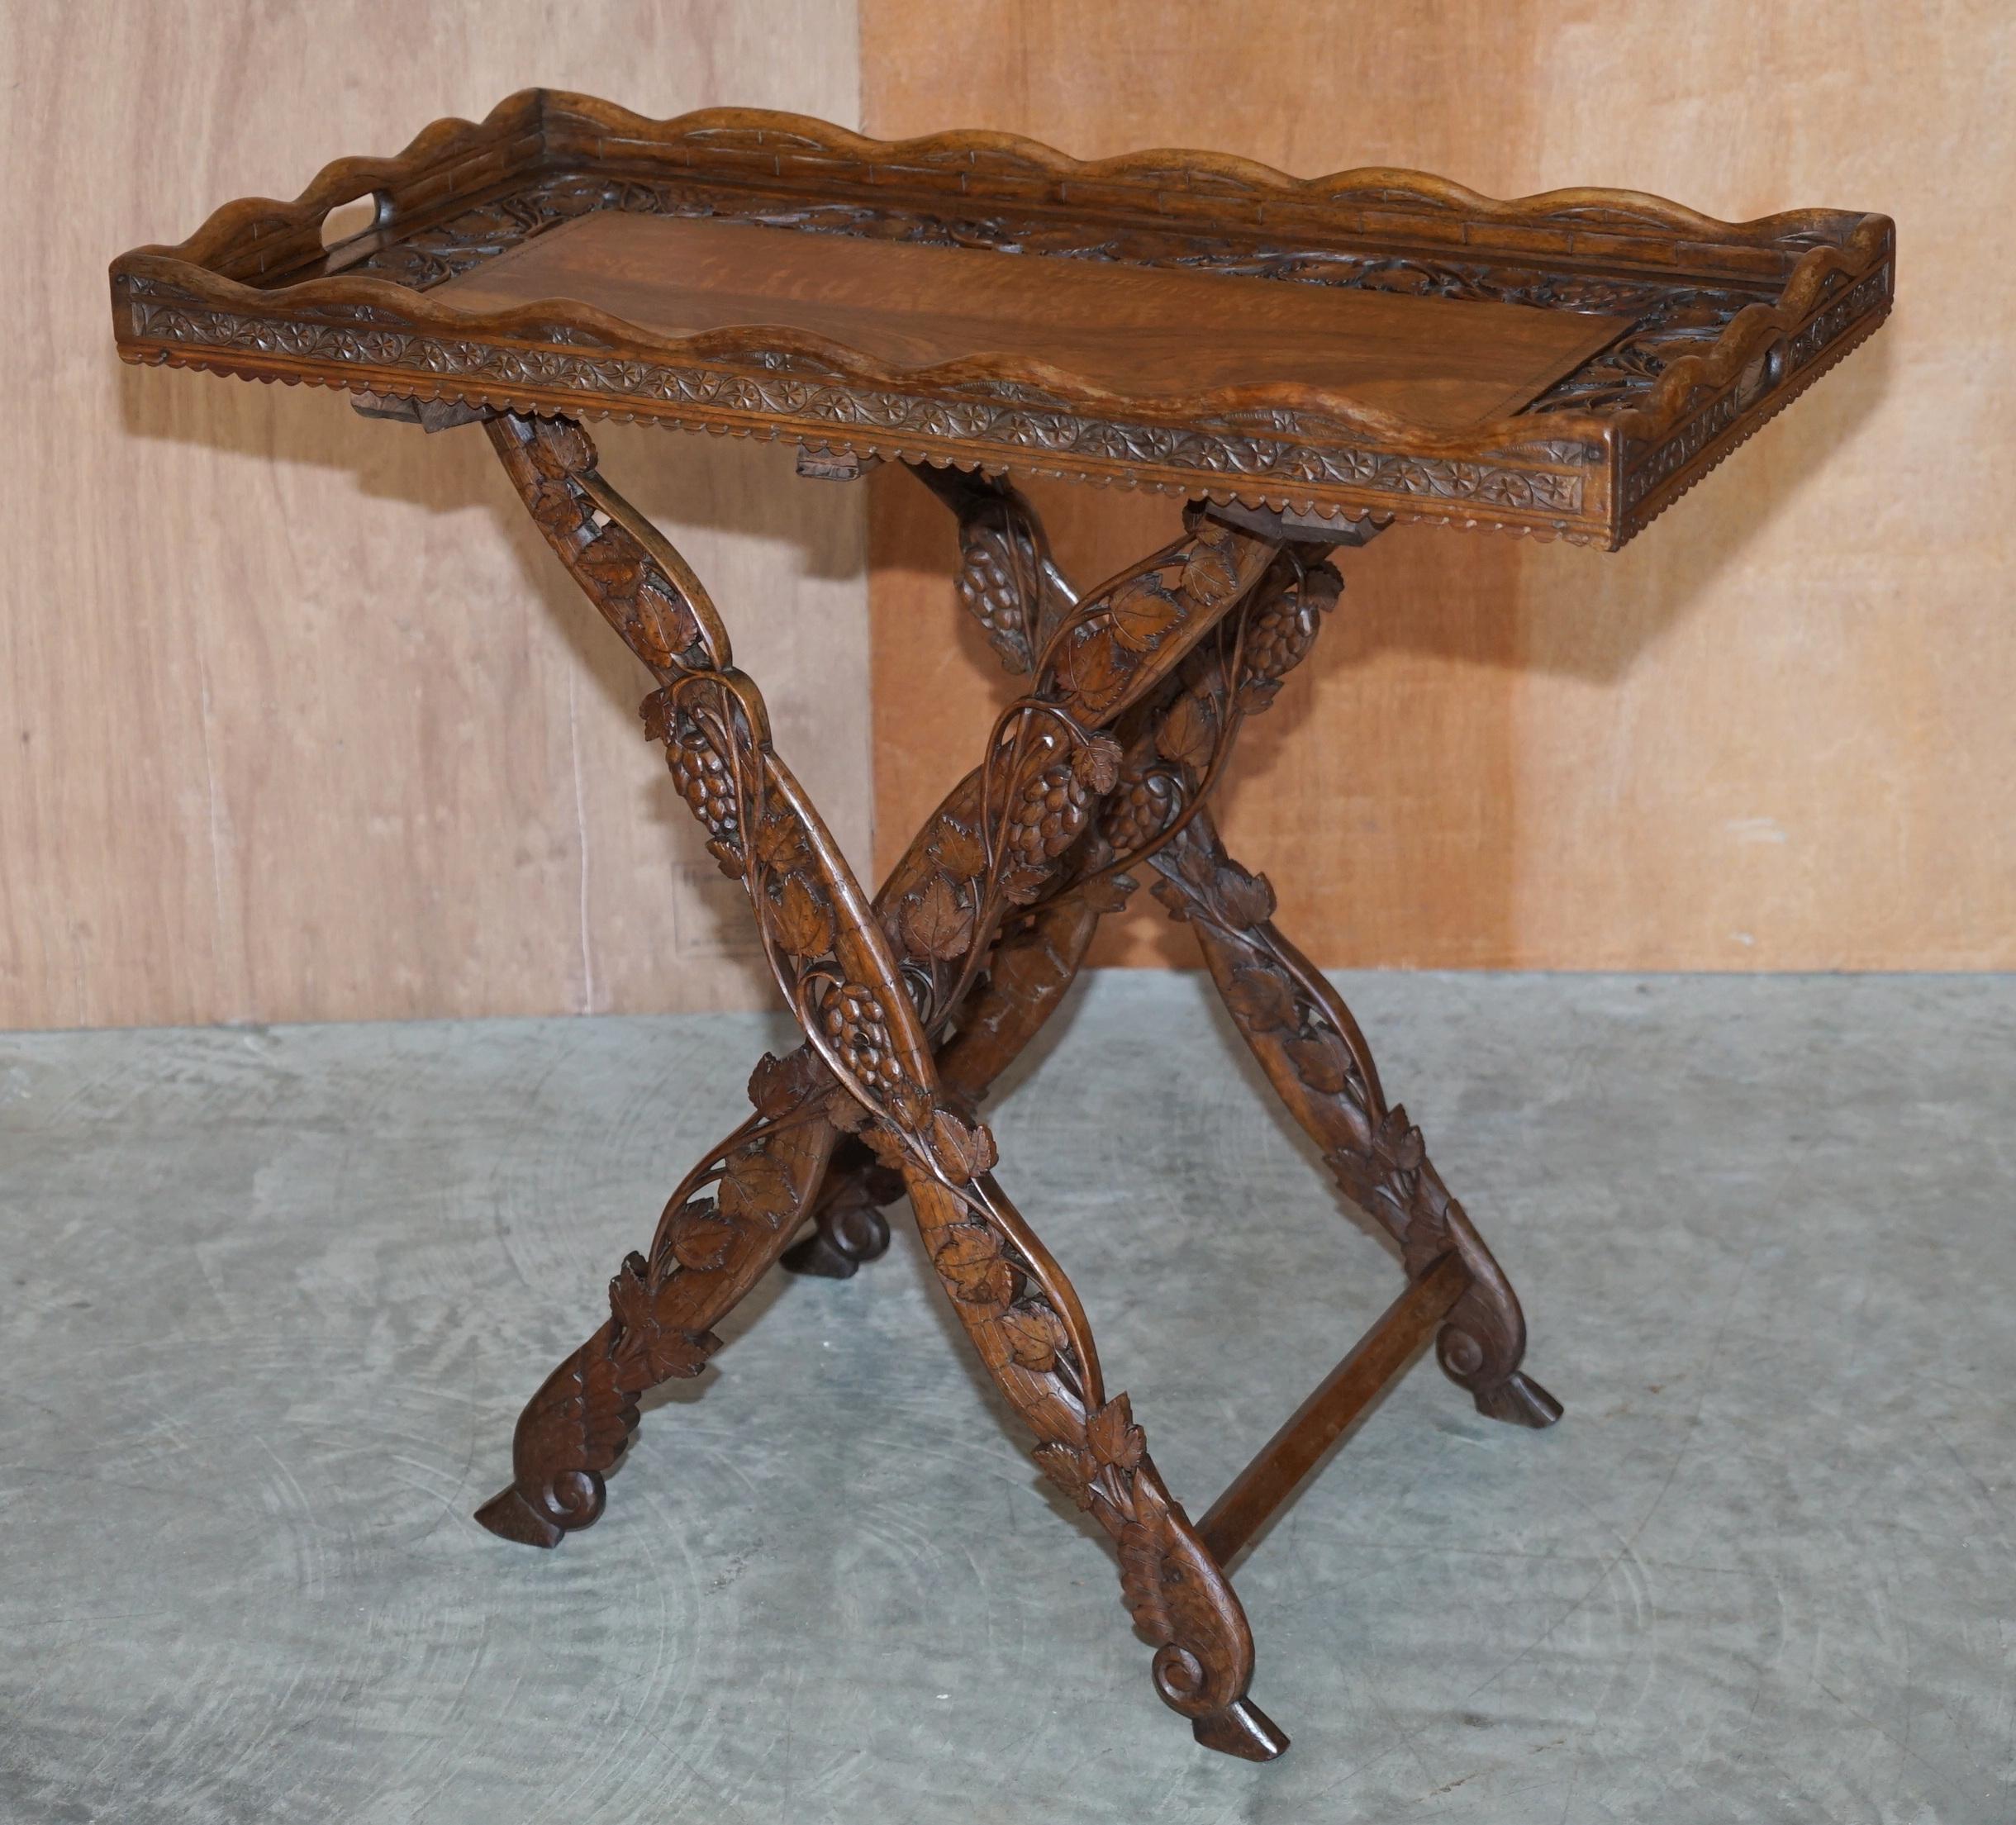 We are delighted to offer this very well made antique circa 1880 Anglo Indian Rosewood hand carved serving tray table that folds away

A very good looking and well made piece. This was produced during the British occupation of India, the natives